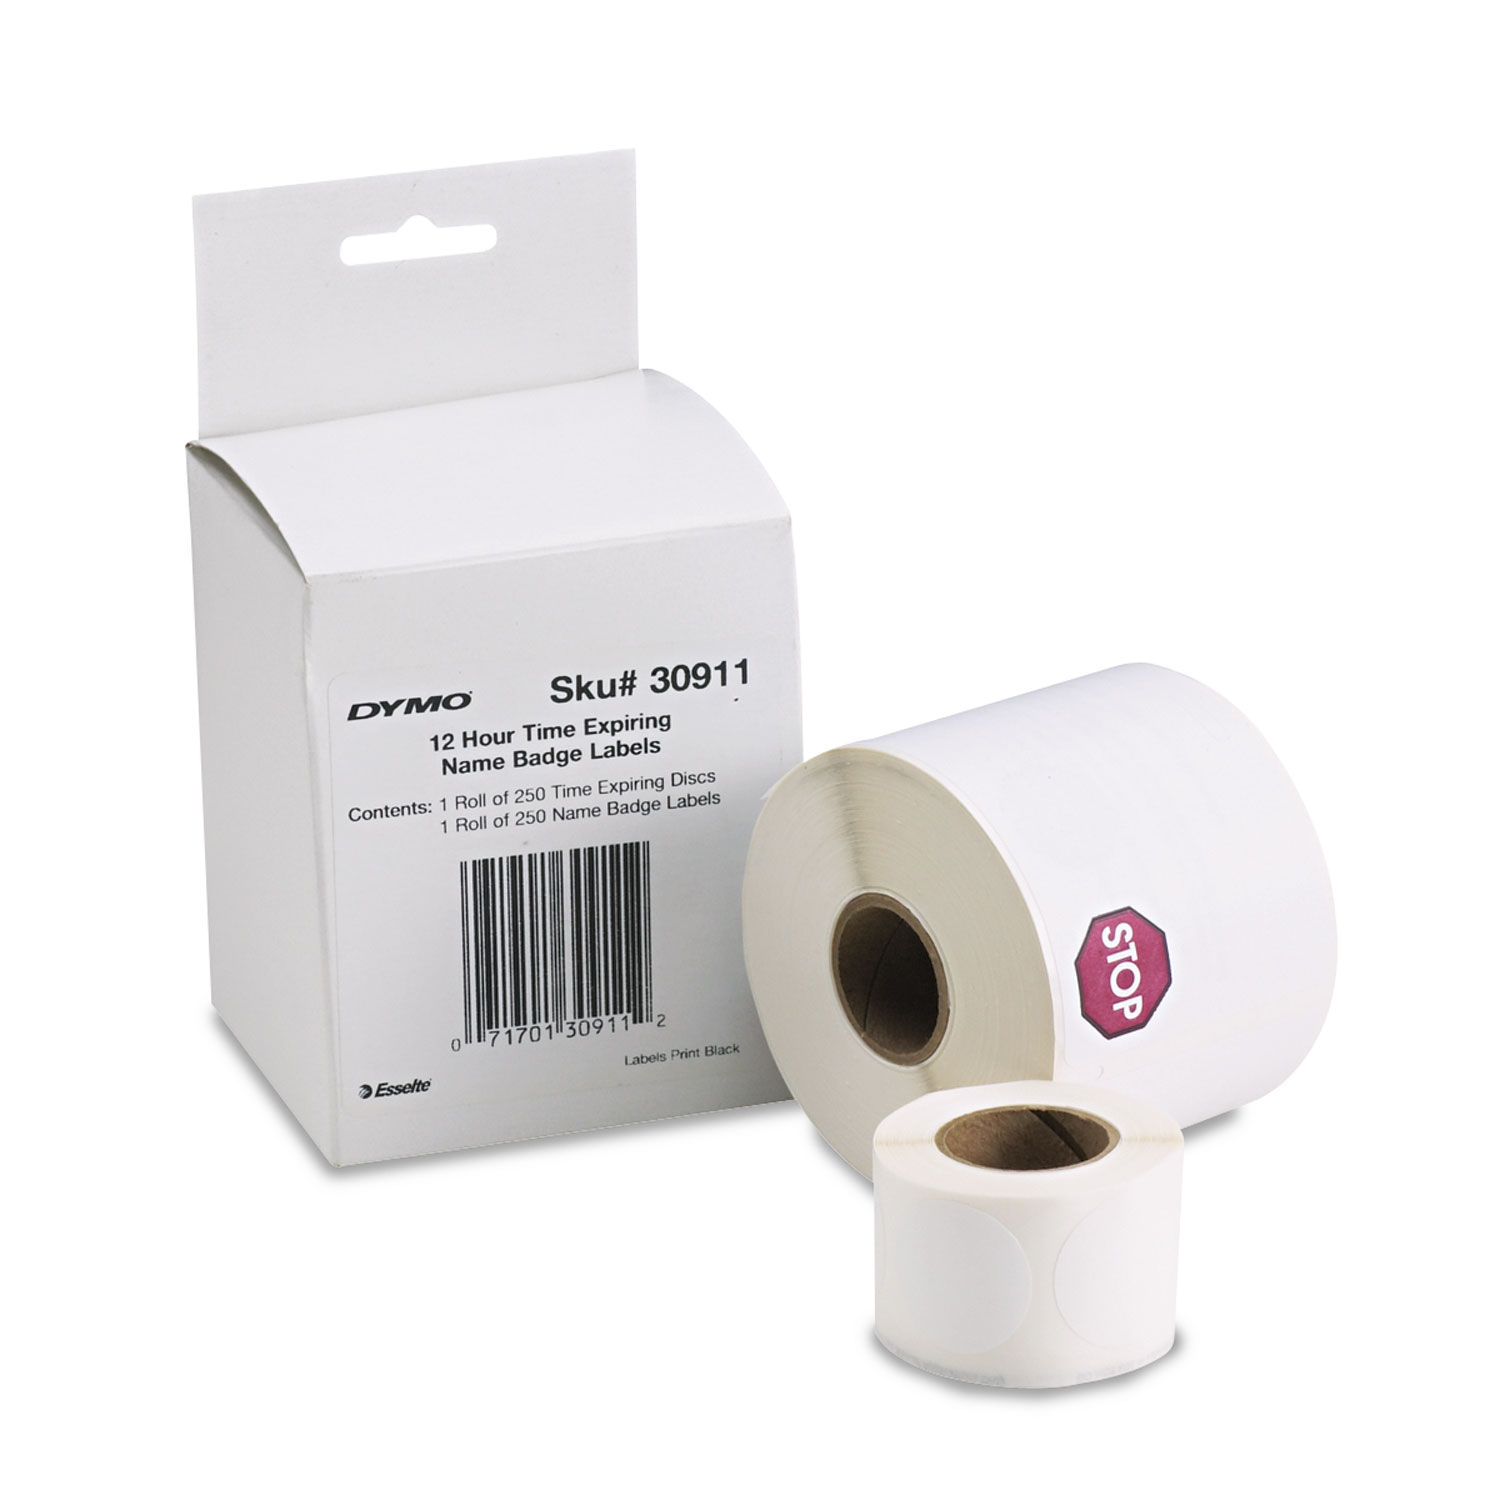 Visitor Management Time-Expiring Name Badges by DYMO® DYM30911 |  